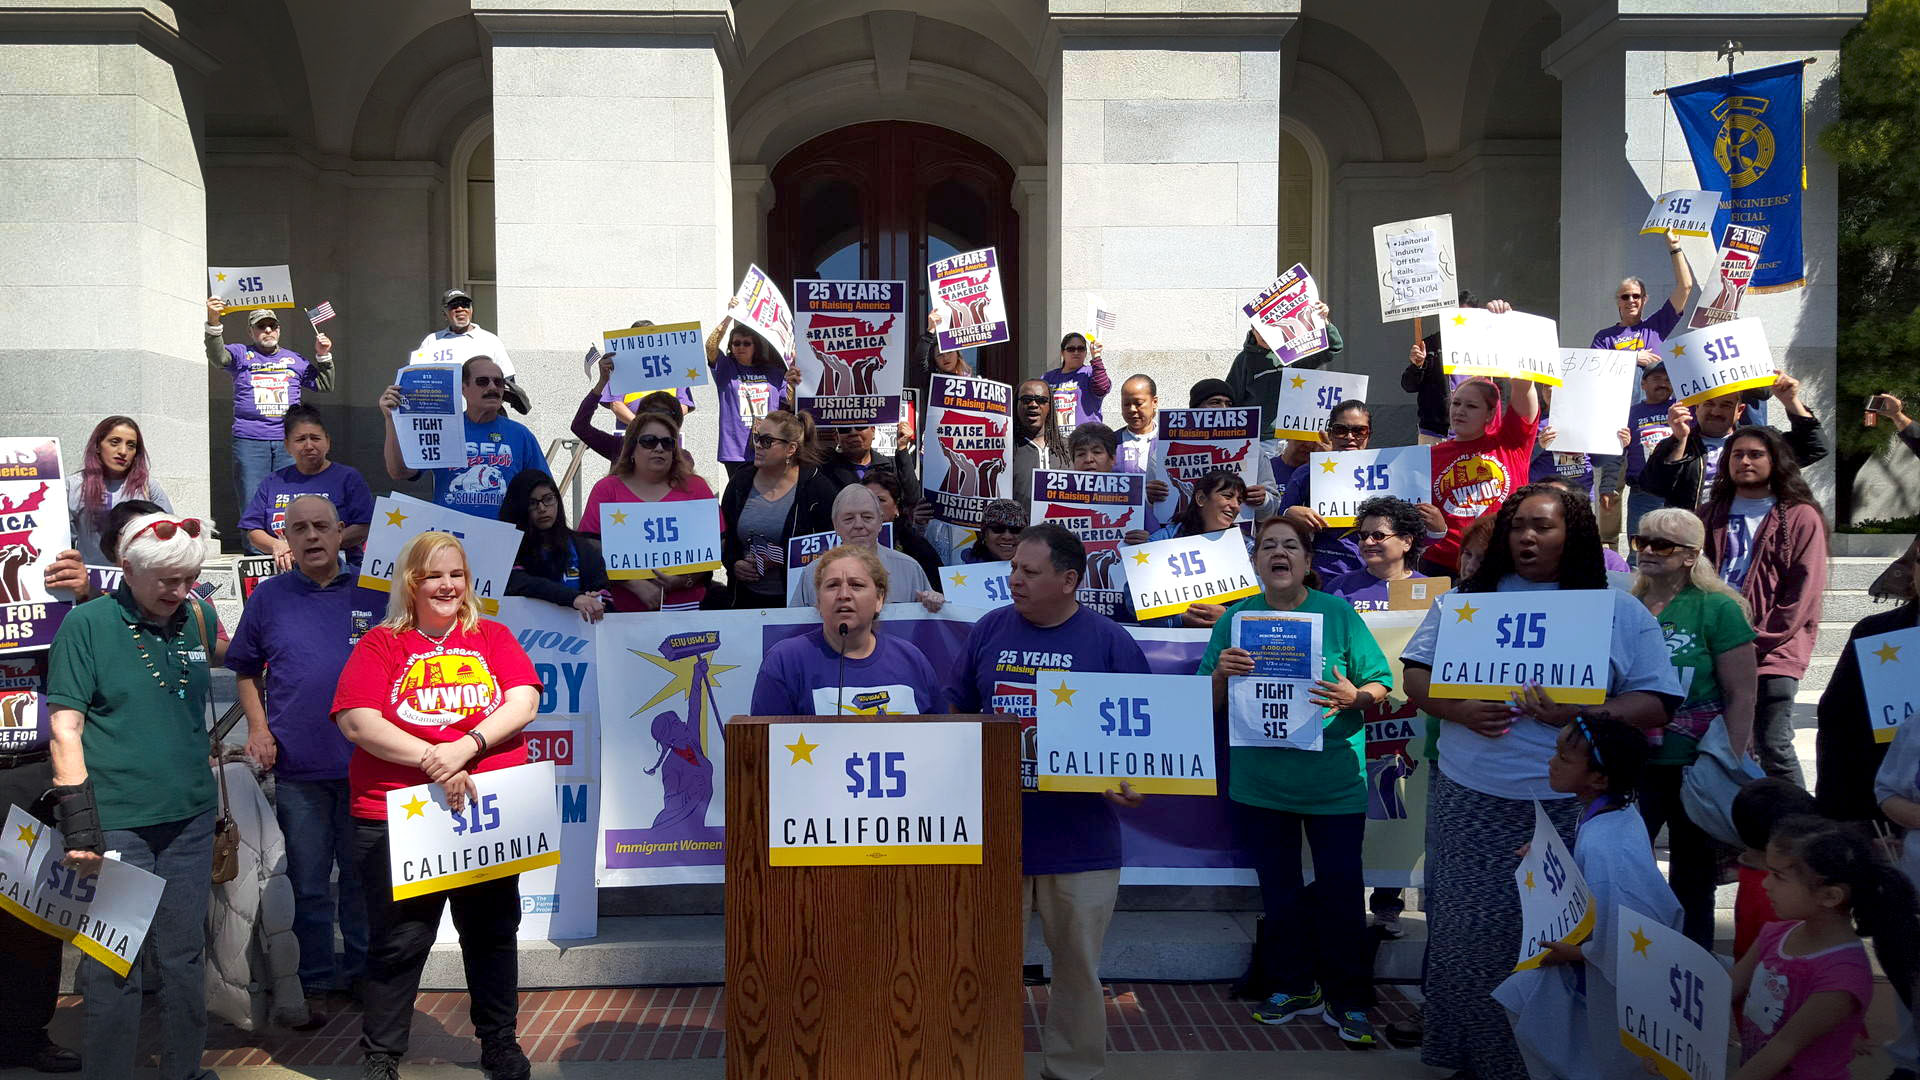 Supporters of a $15 per hour minimum wage rally outside the state Capitol in Sacramento on March 31, 2016.